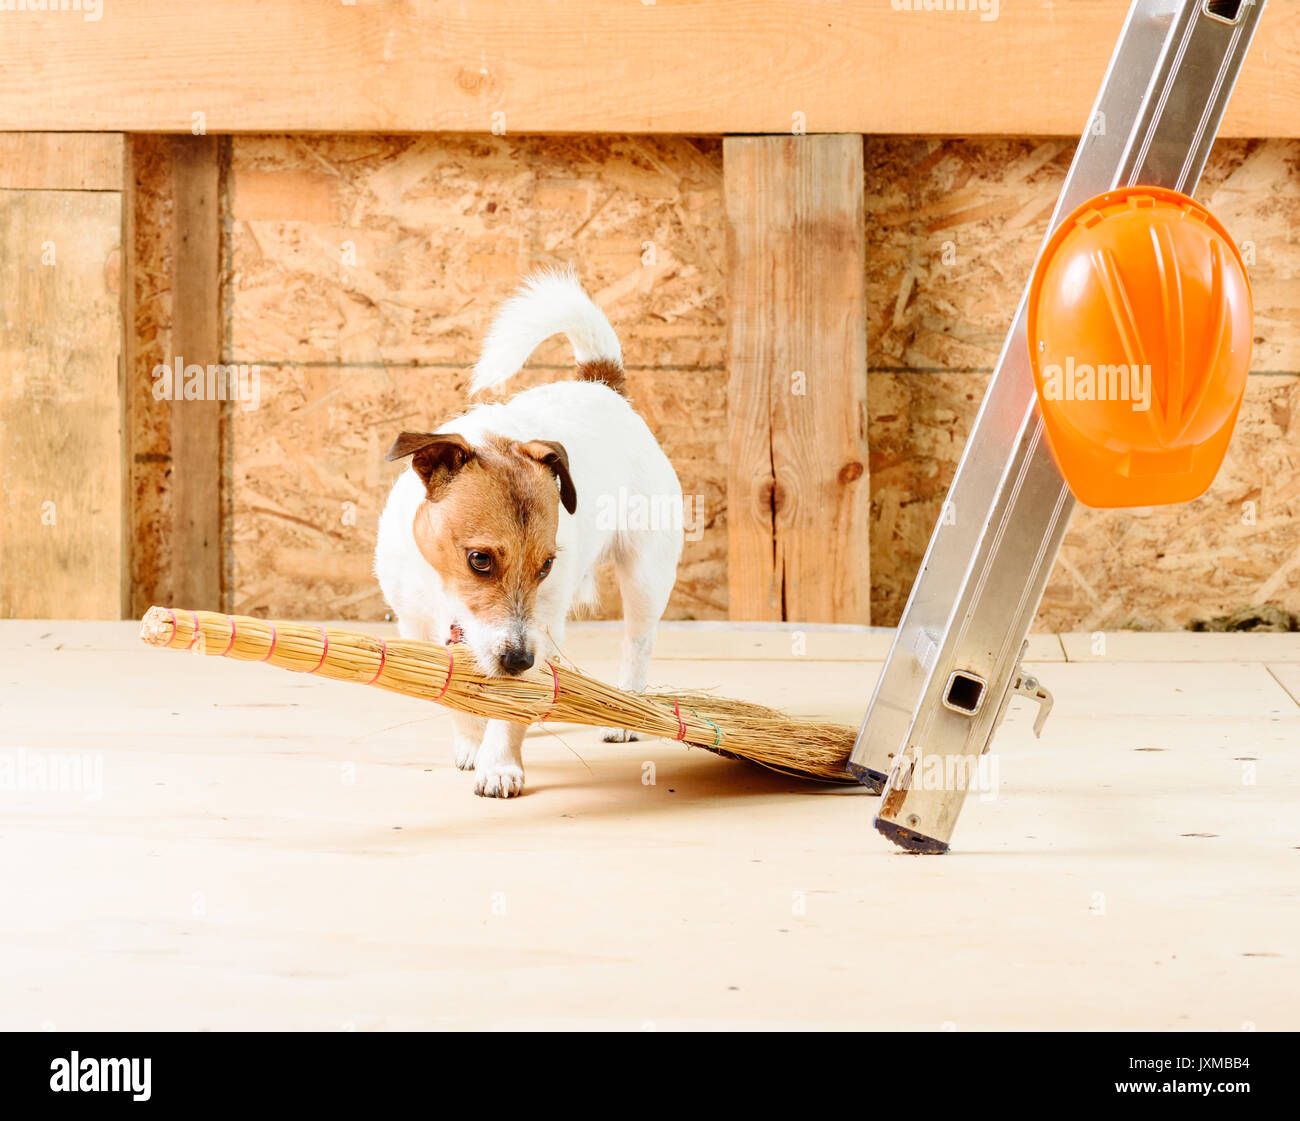 Dog sweeping floor and cleaning up with broom at construction site Stock Photo